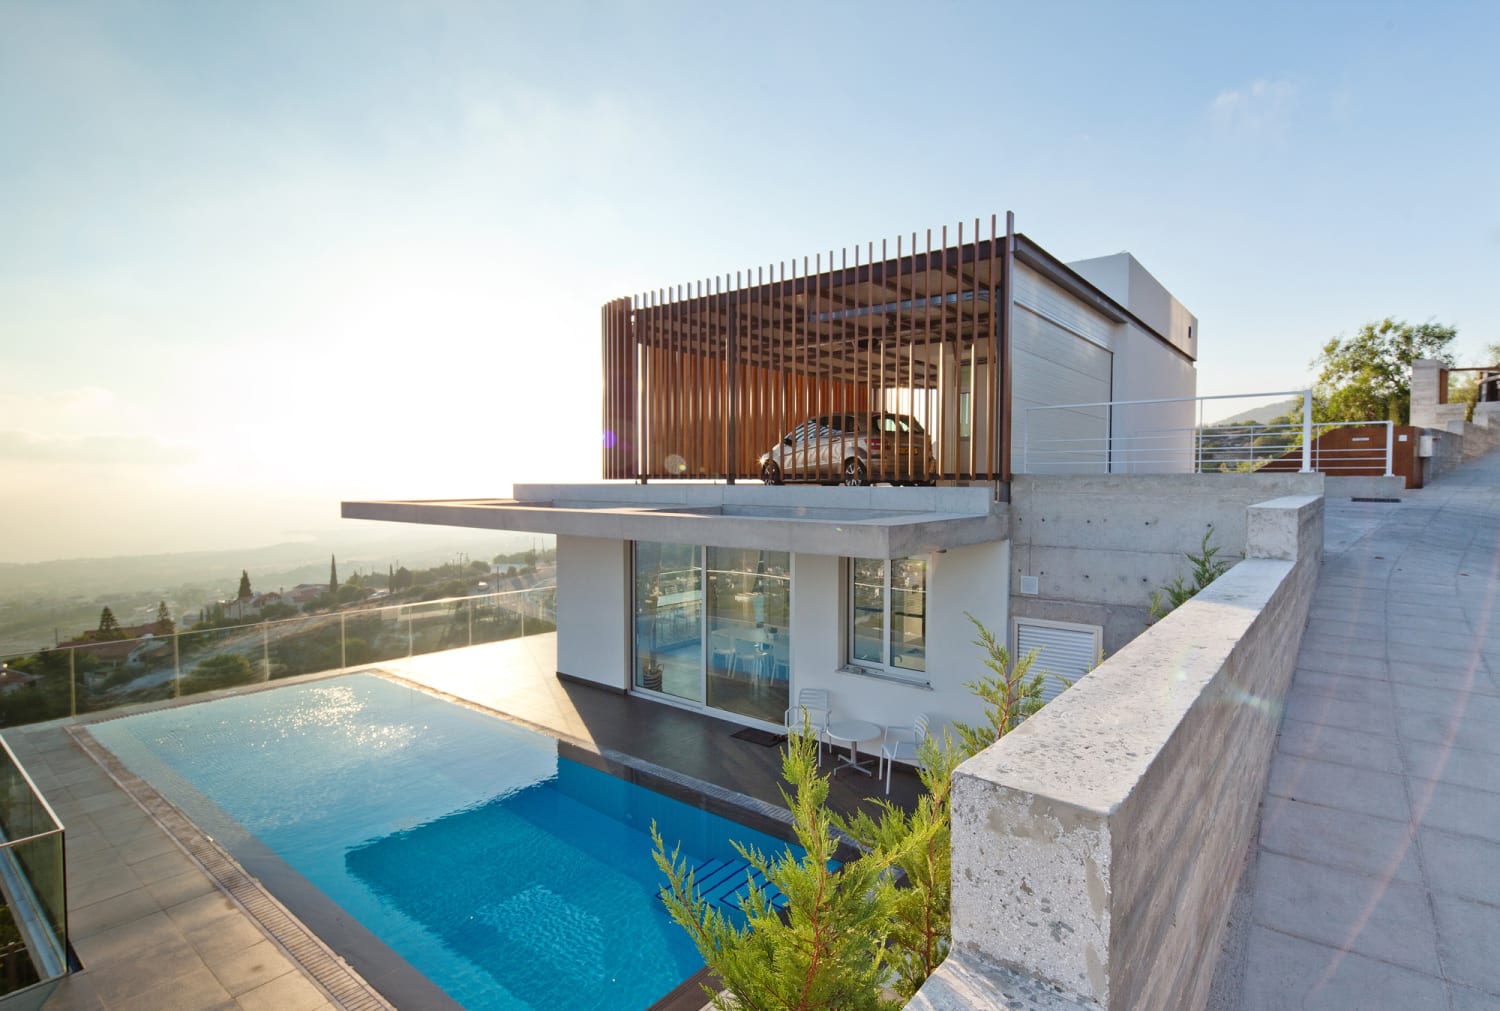 Concrete and Stone: New Homes Reinterpreting Tradition in Cyprus